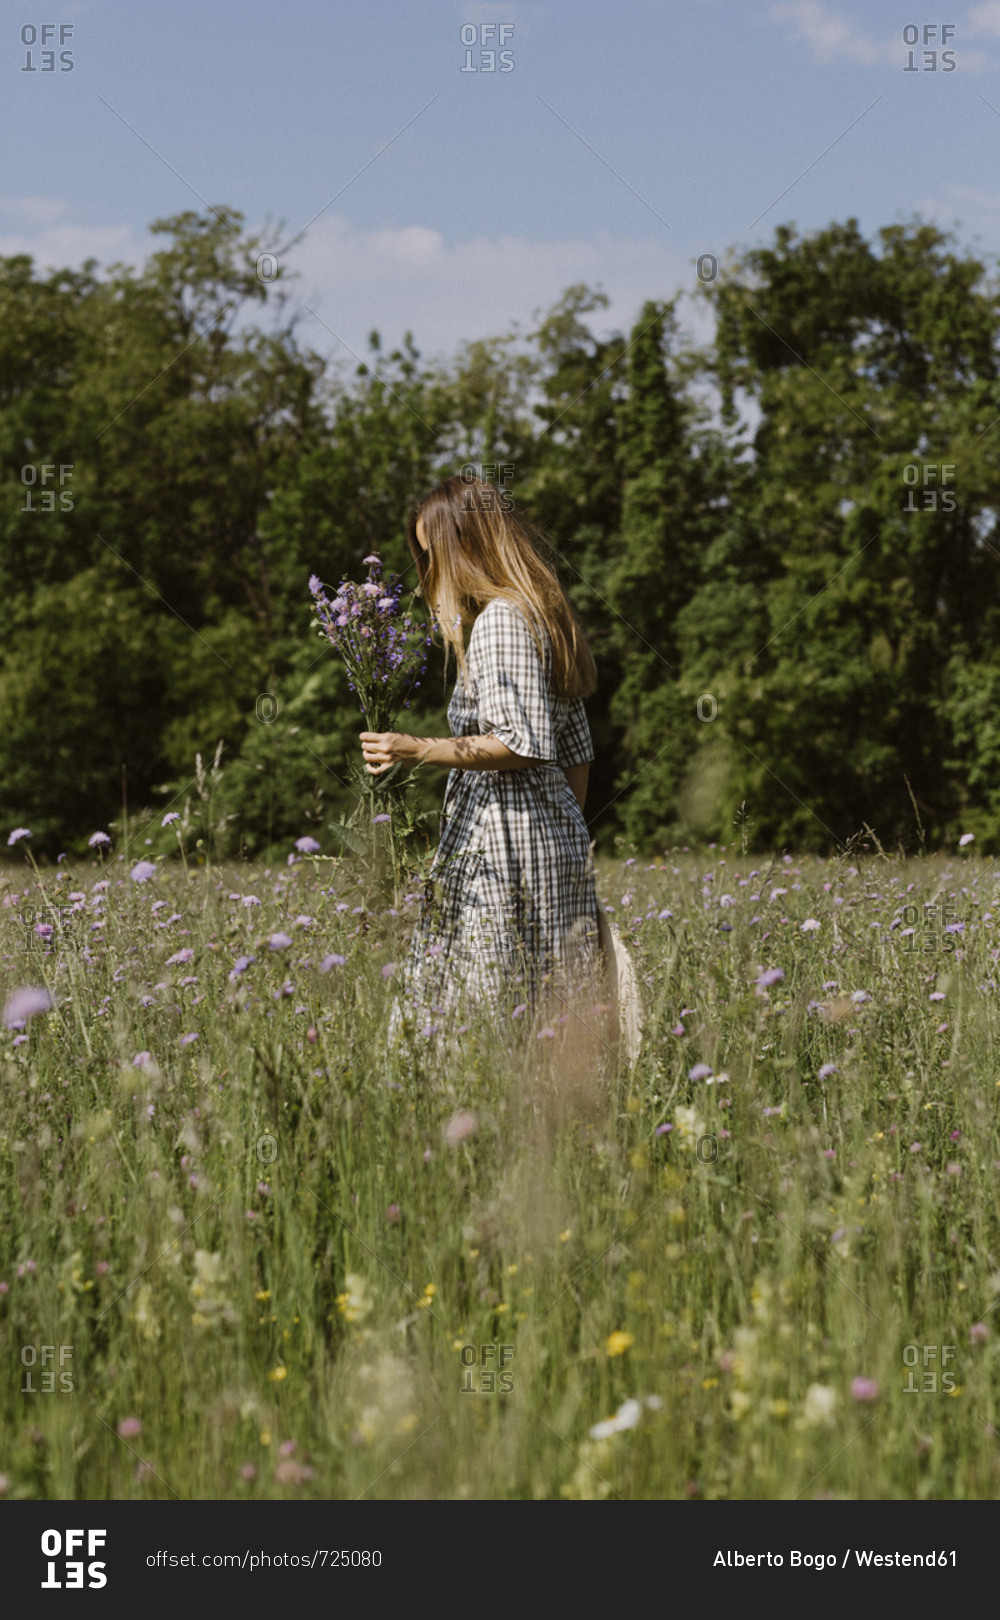 Italy, Veneto, Young woman plucking flowers and herbs in field